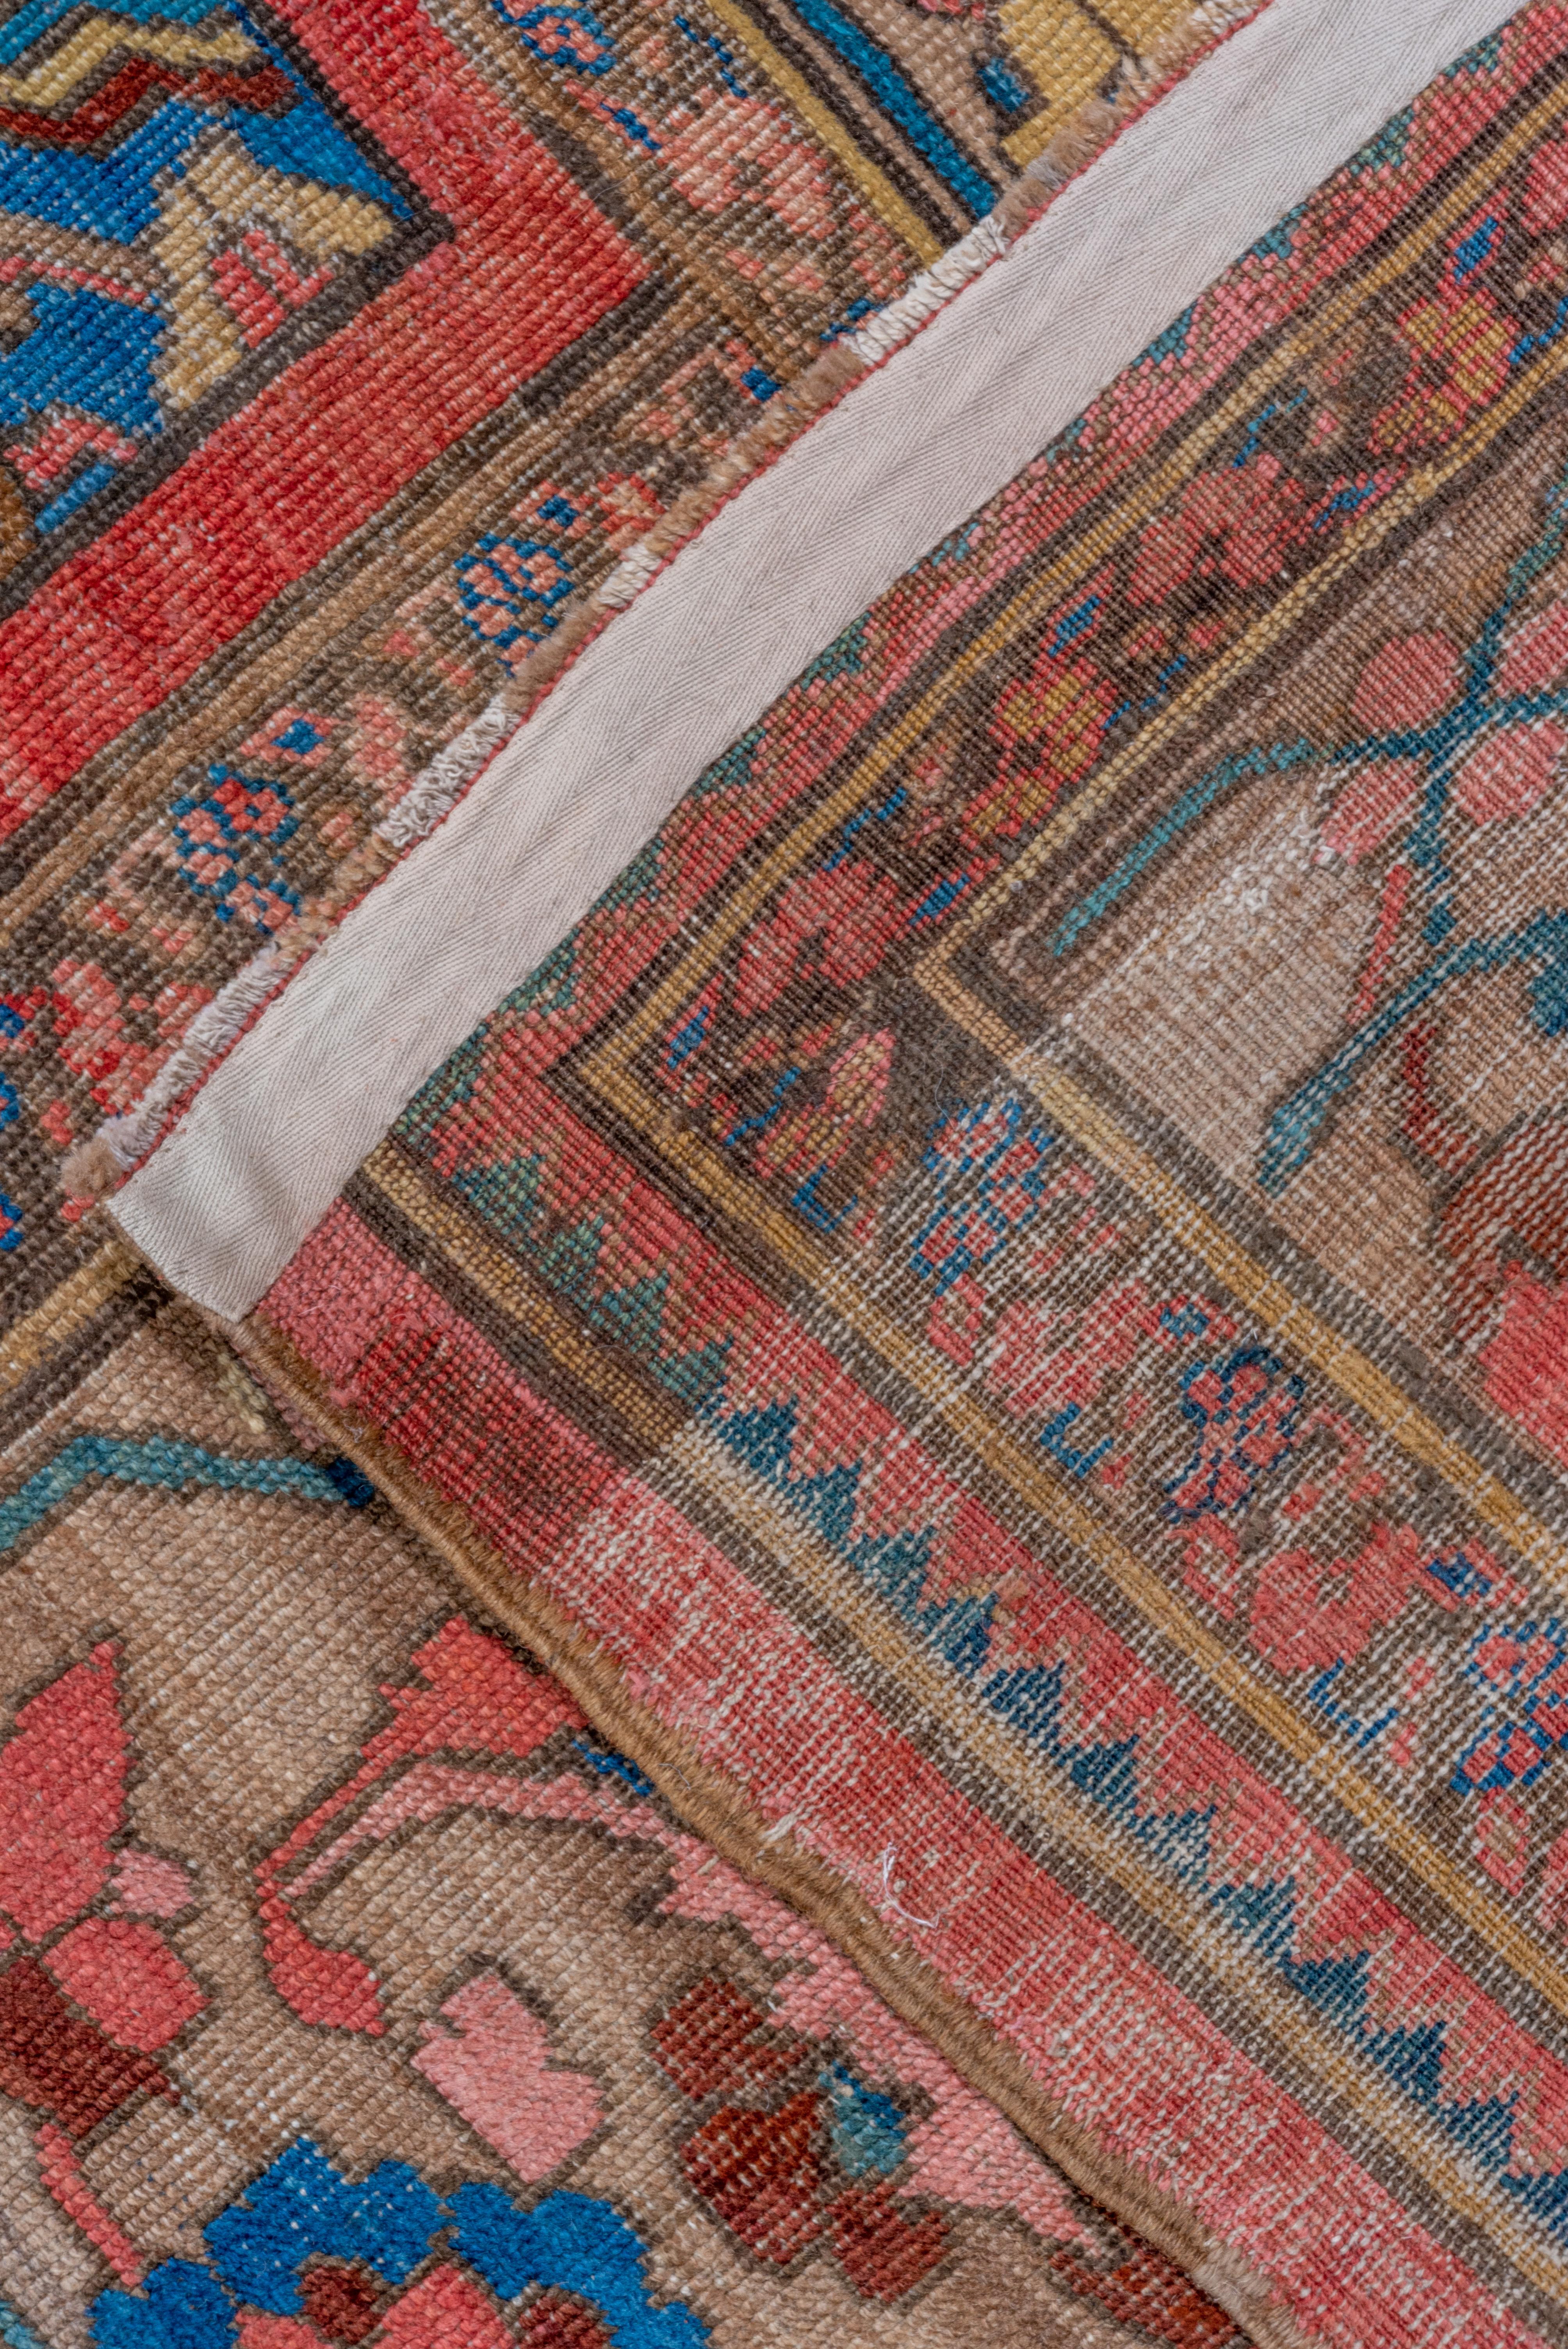 Outsanding Colorful Antique Persian Bakhshayesh Carpet, Late 19th Century For Sale 2